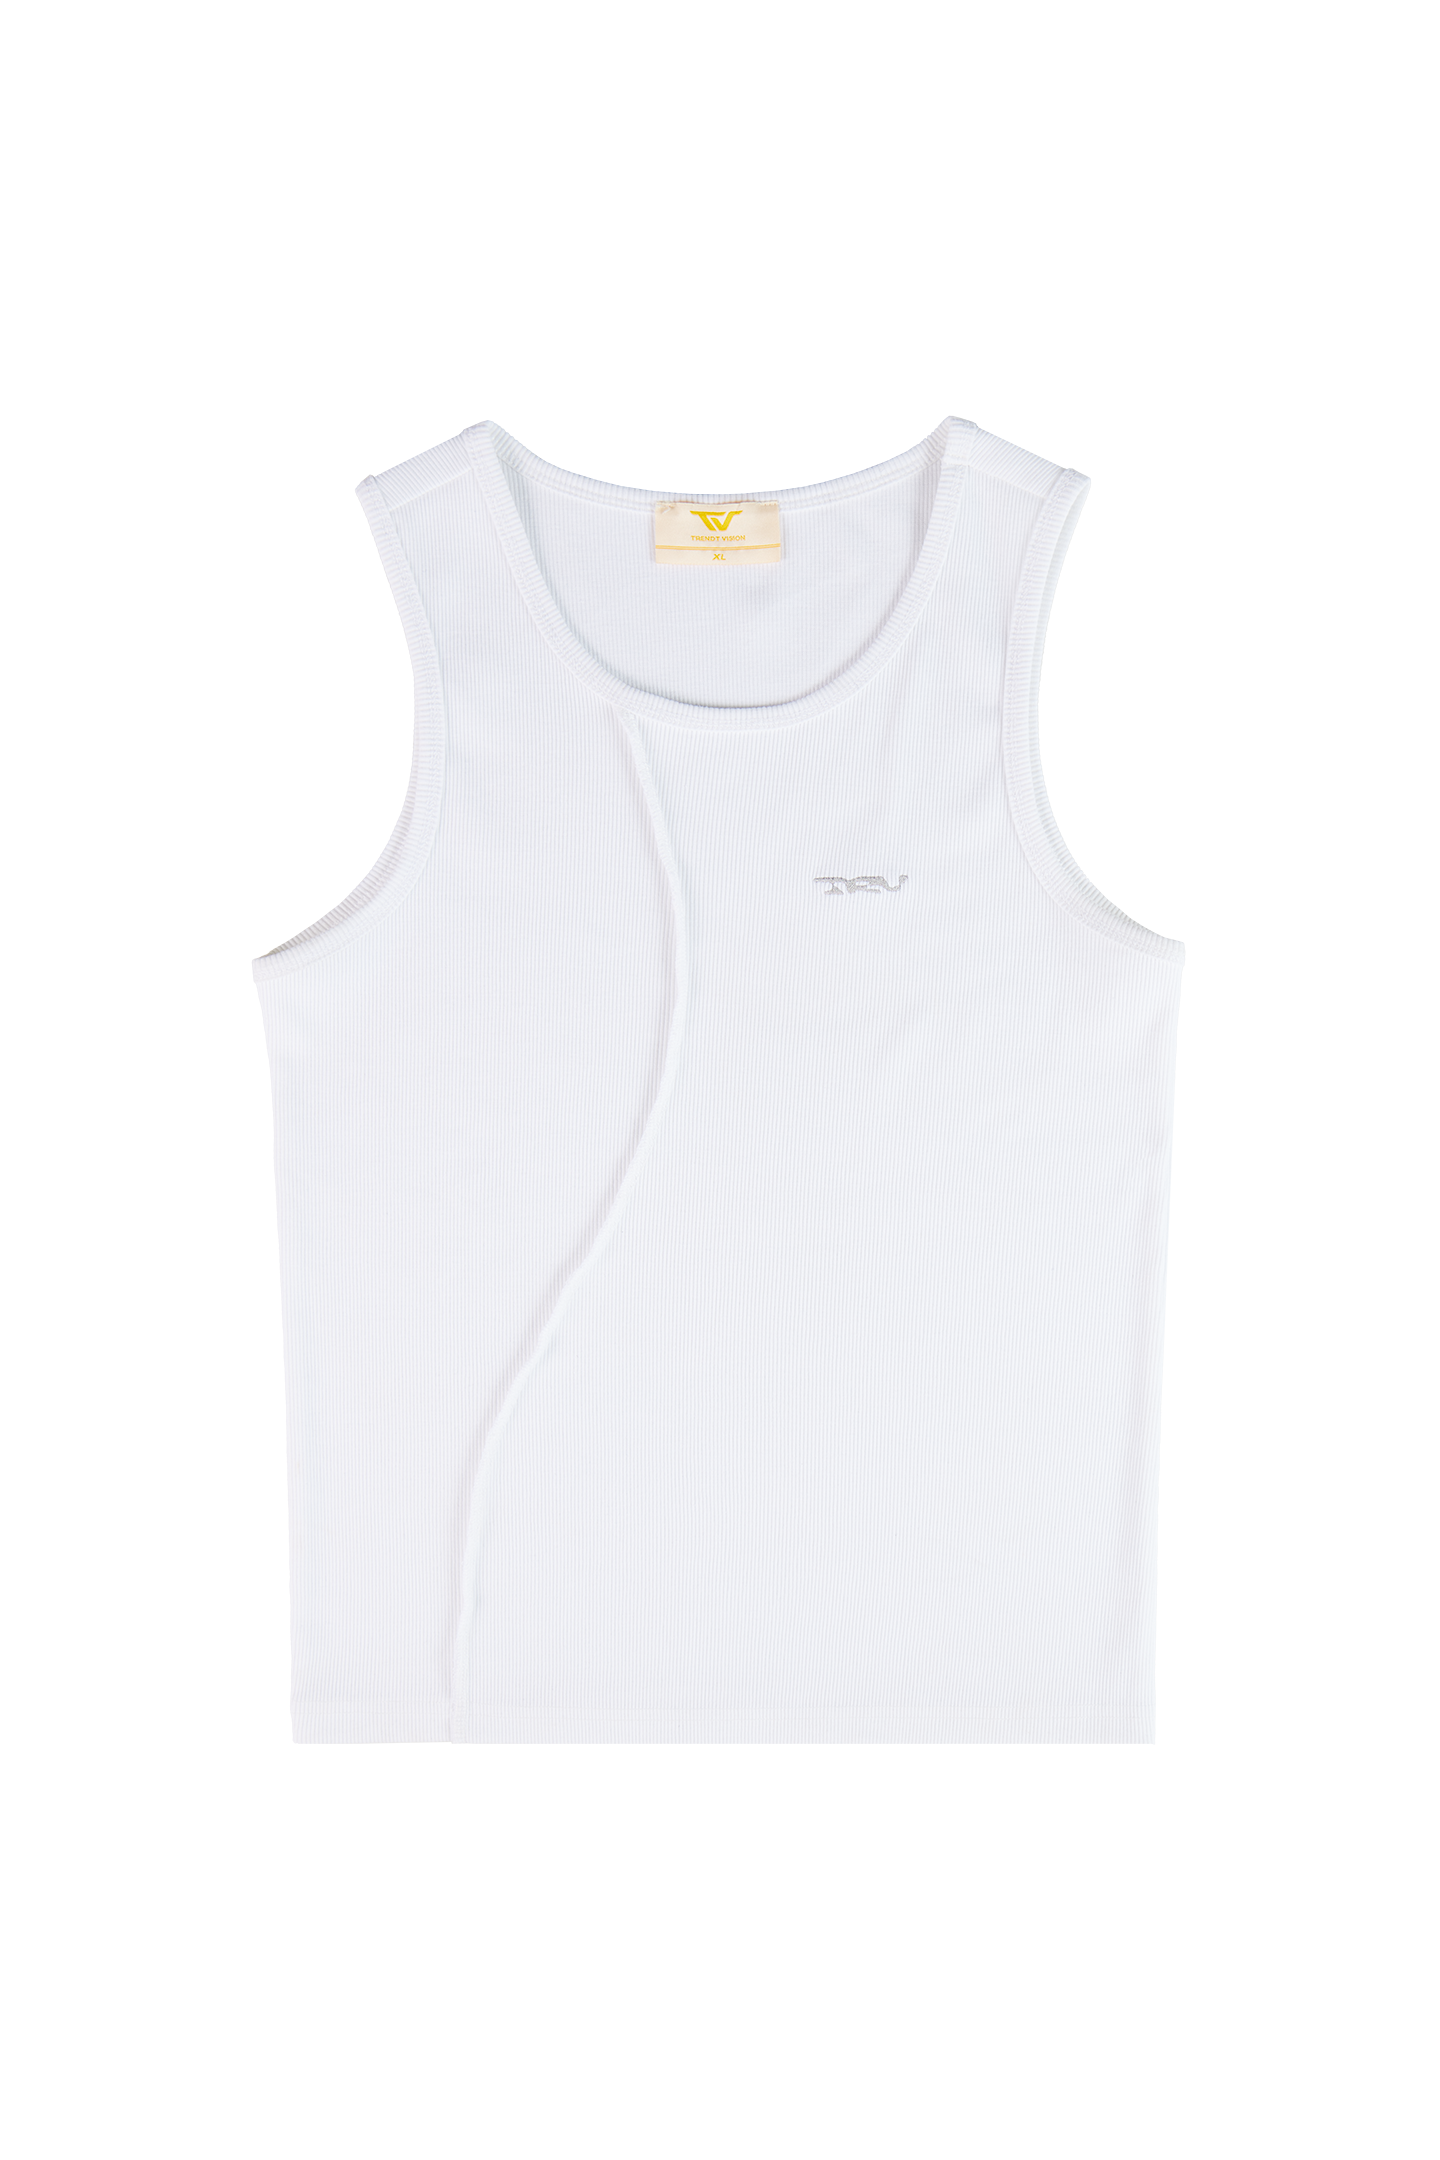 White "After Life" Tank Top